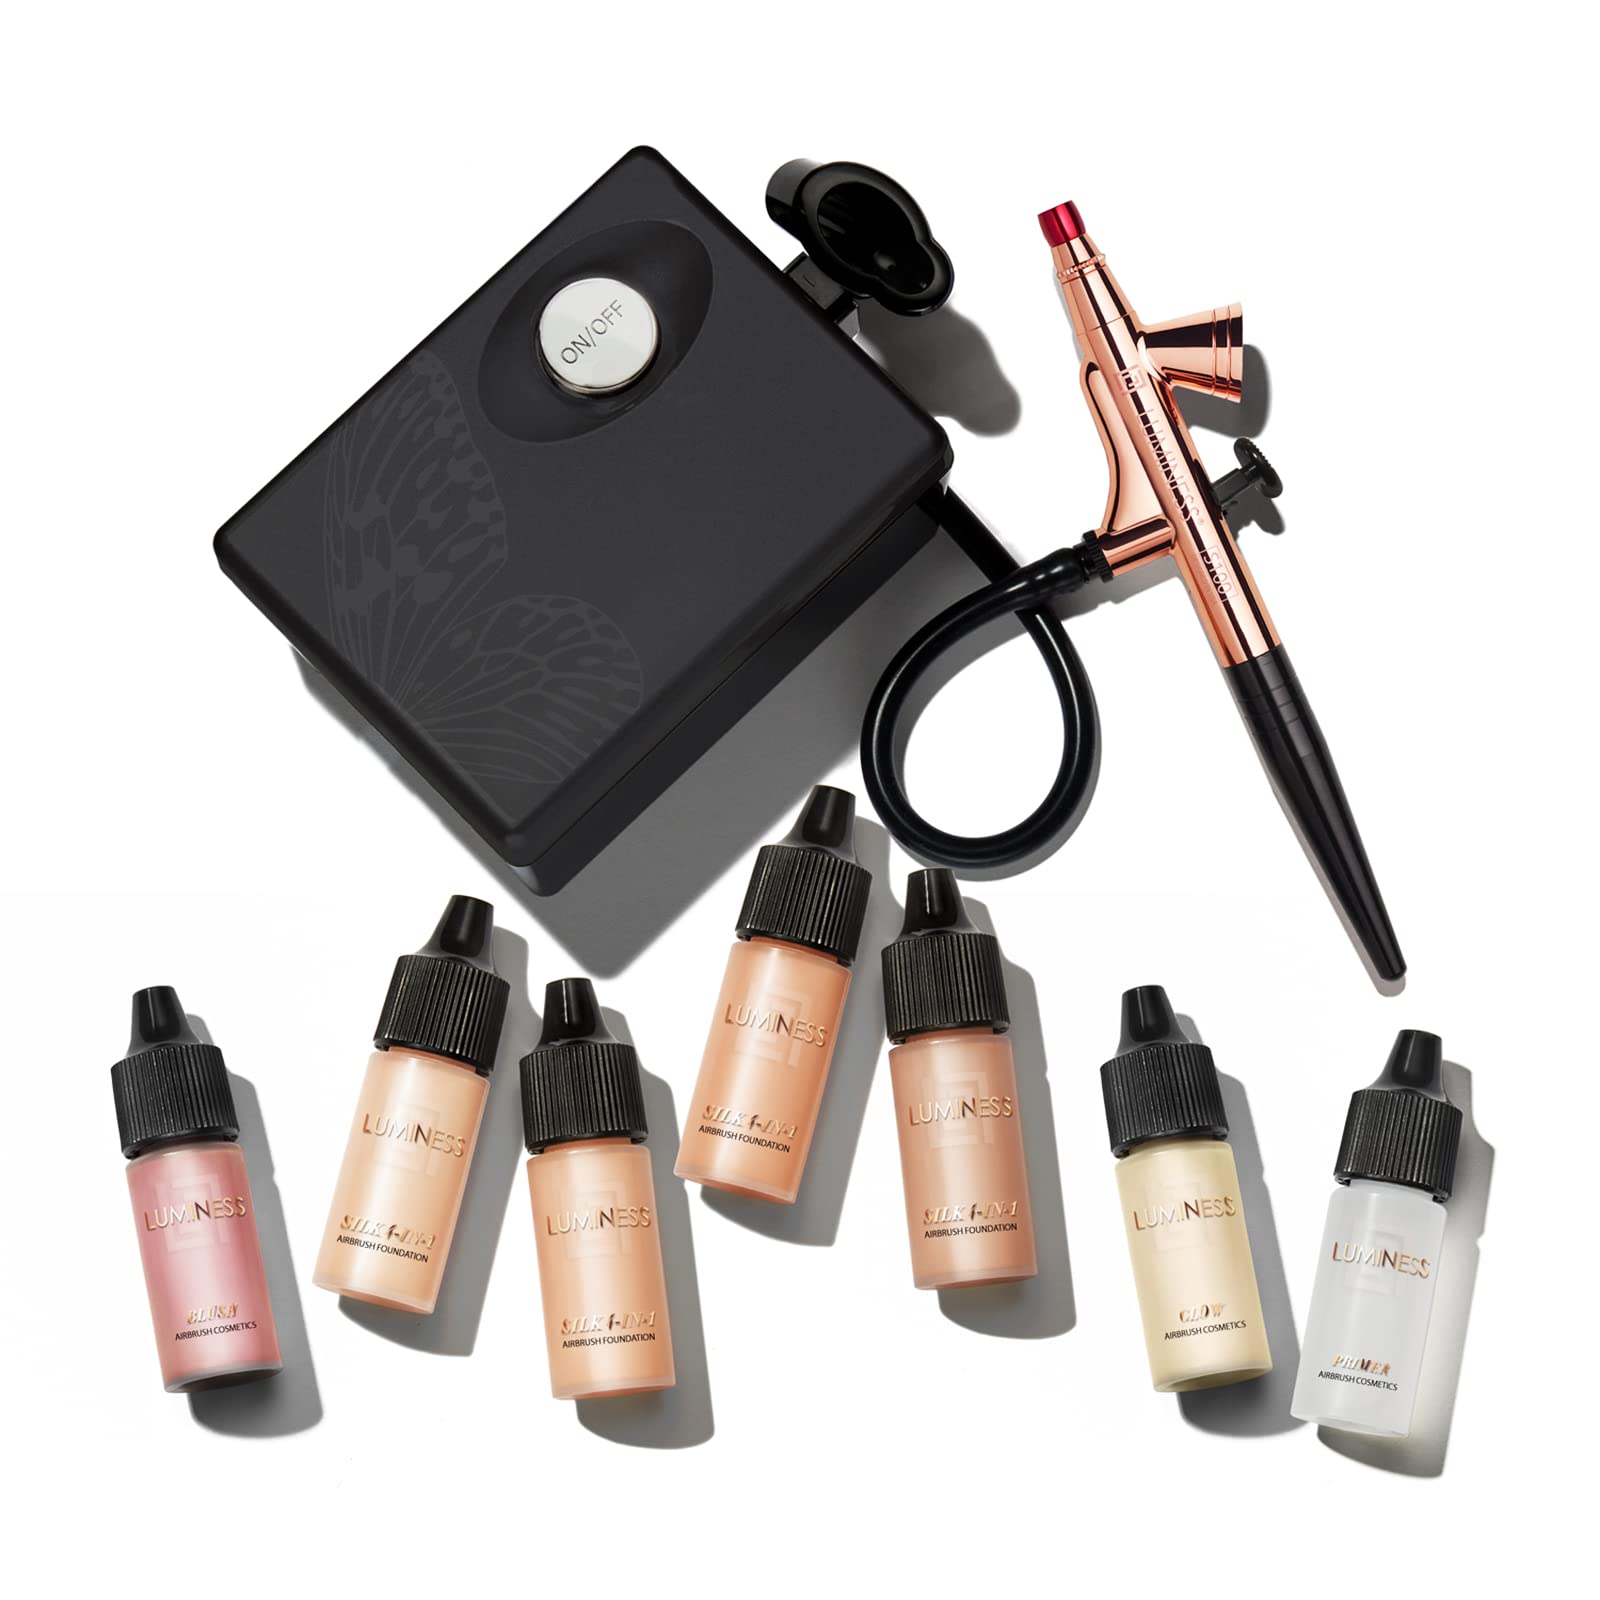 Luminess Air Basic Airbrush Makeup Kit and 9-Piece Silk 4-In-1 Airbrush Foundation Starter System, Warm Coverage - Quick, Easy and Long Lasting Application - Includes Primer, Blush and Glow